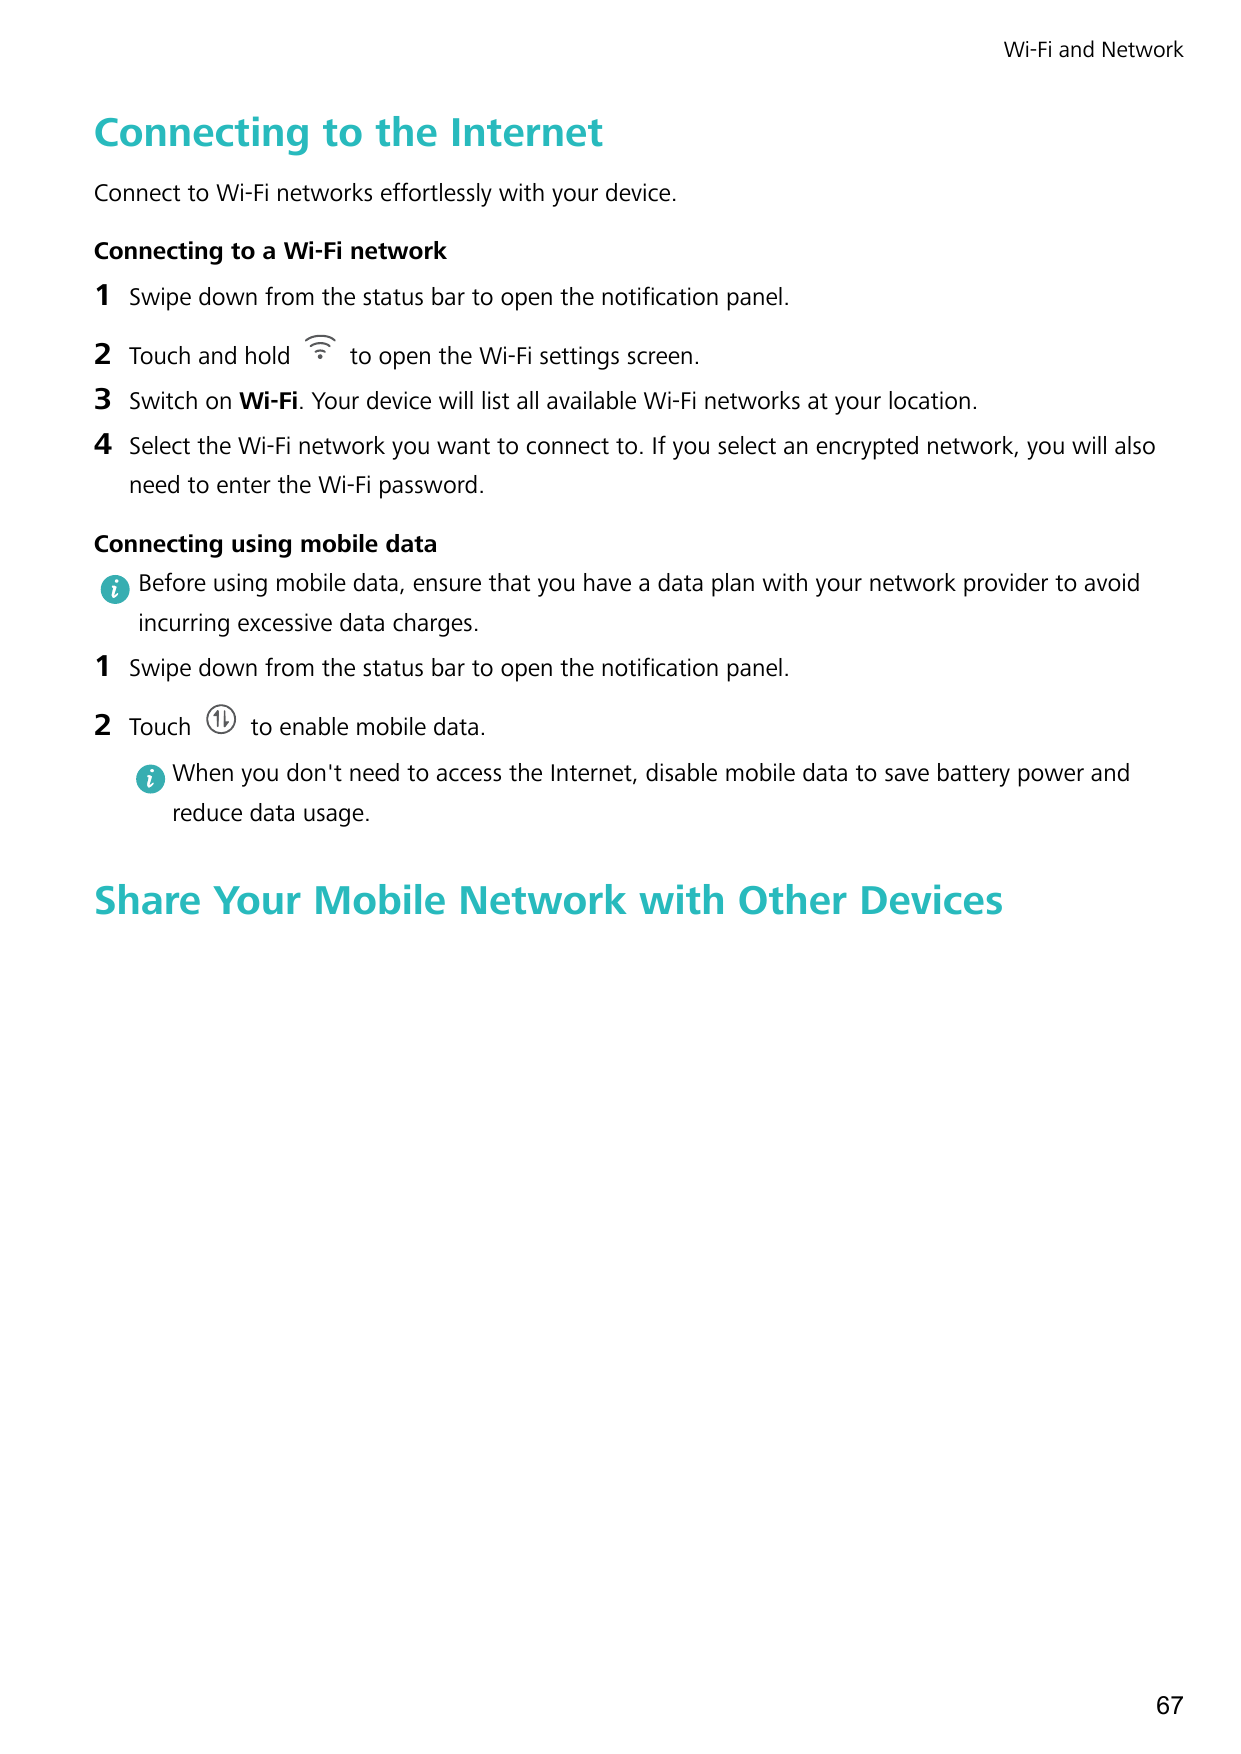 Wi-Fi and NetworkConnecting to the InternetConnect to Wi-Fi networks effortlessly with your device.Connecting to a Wi-Fi network